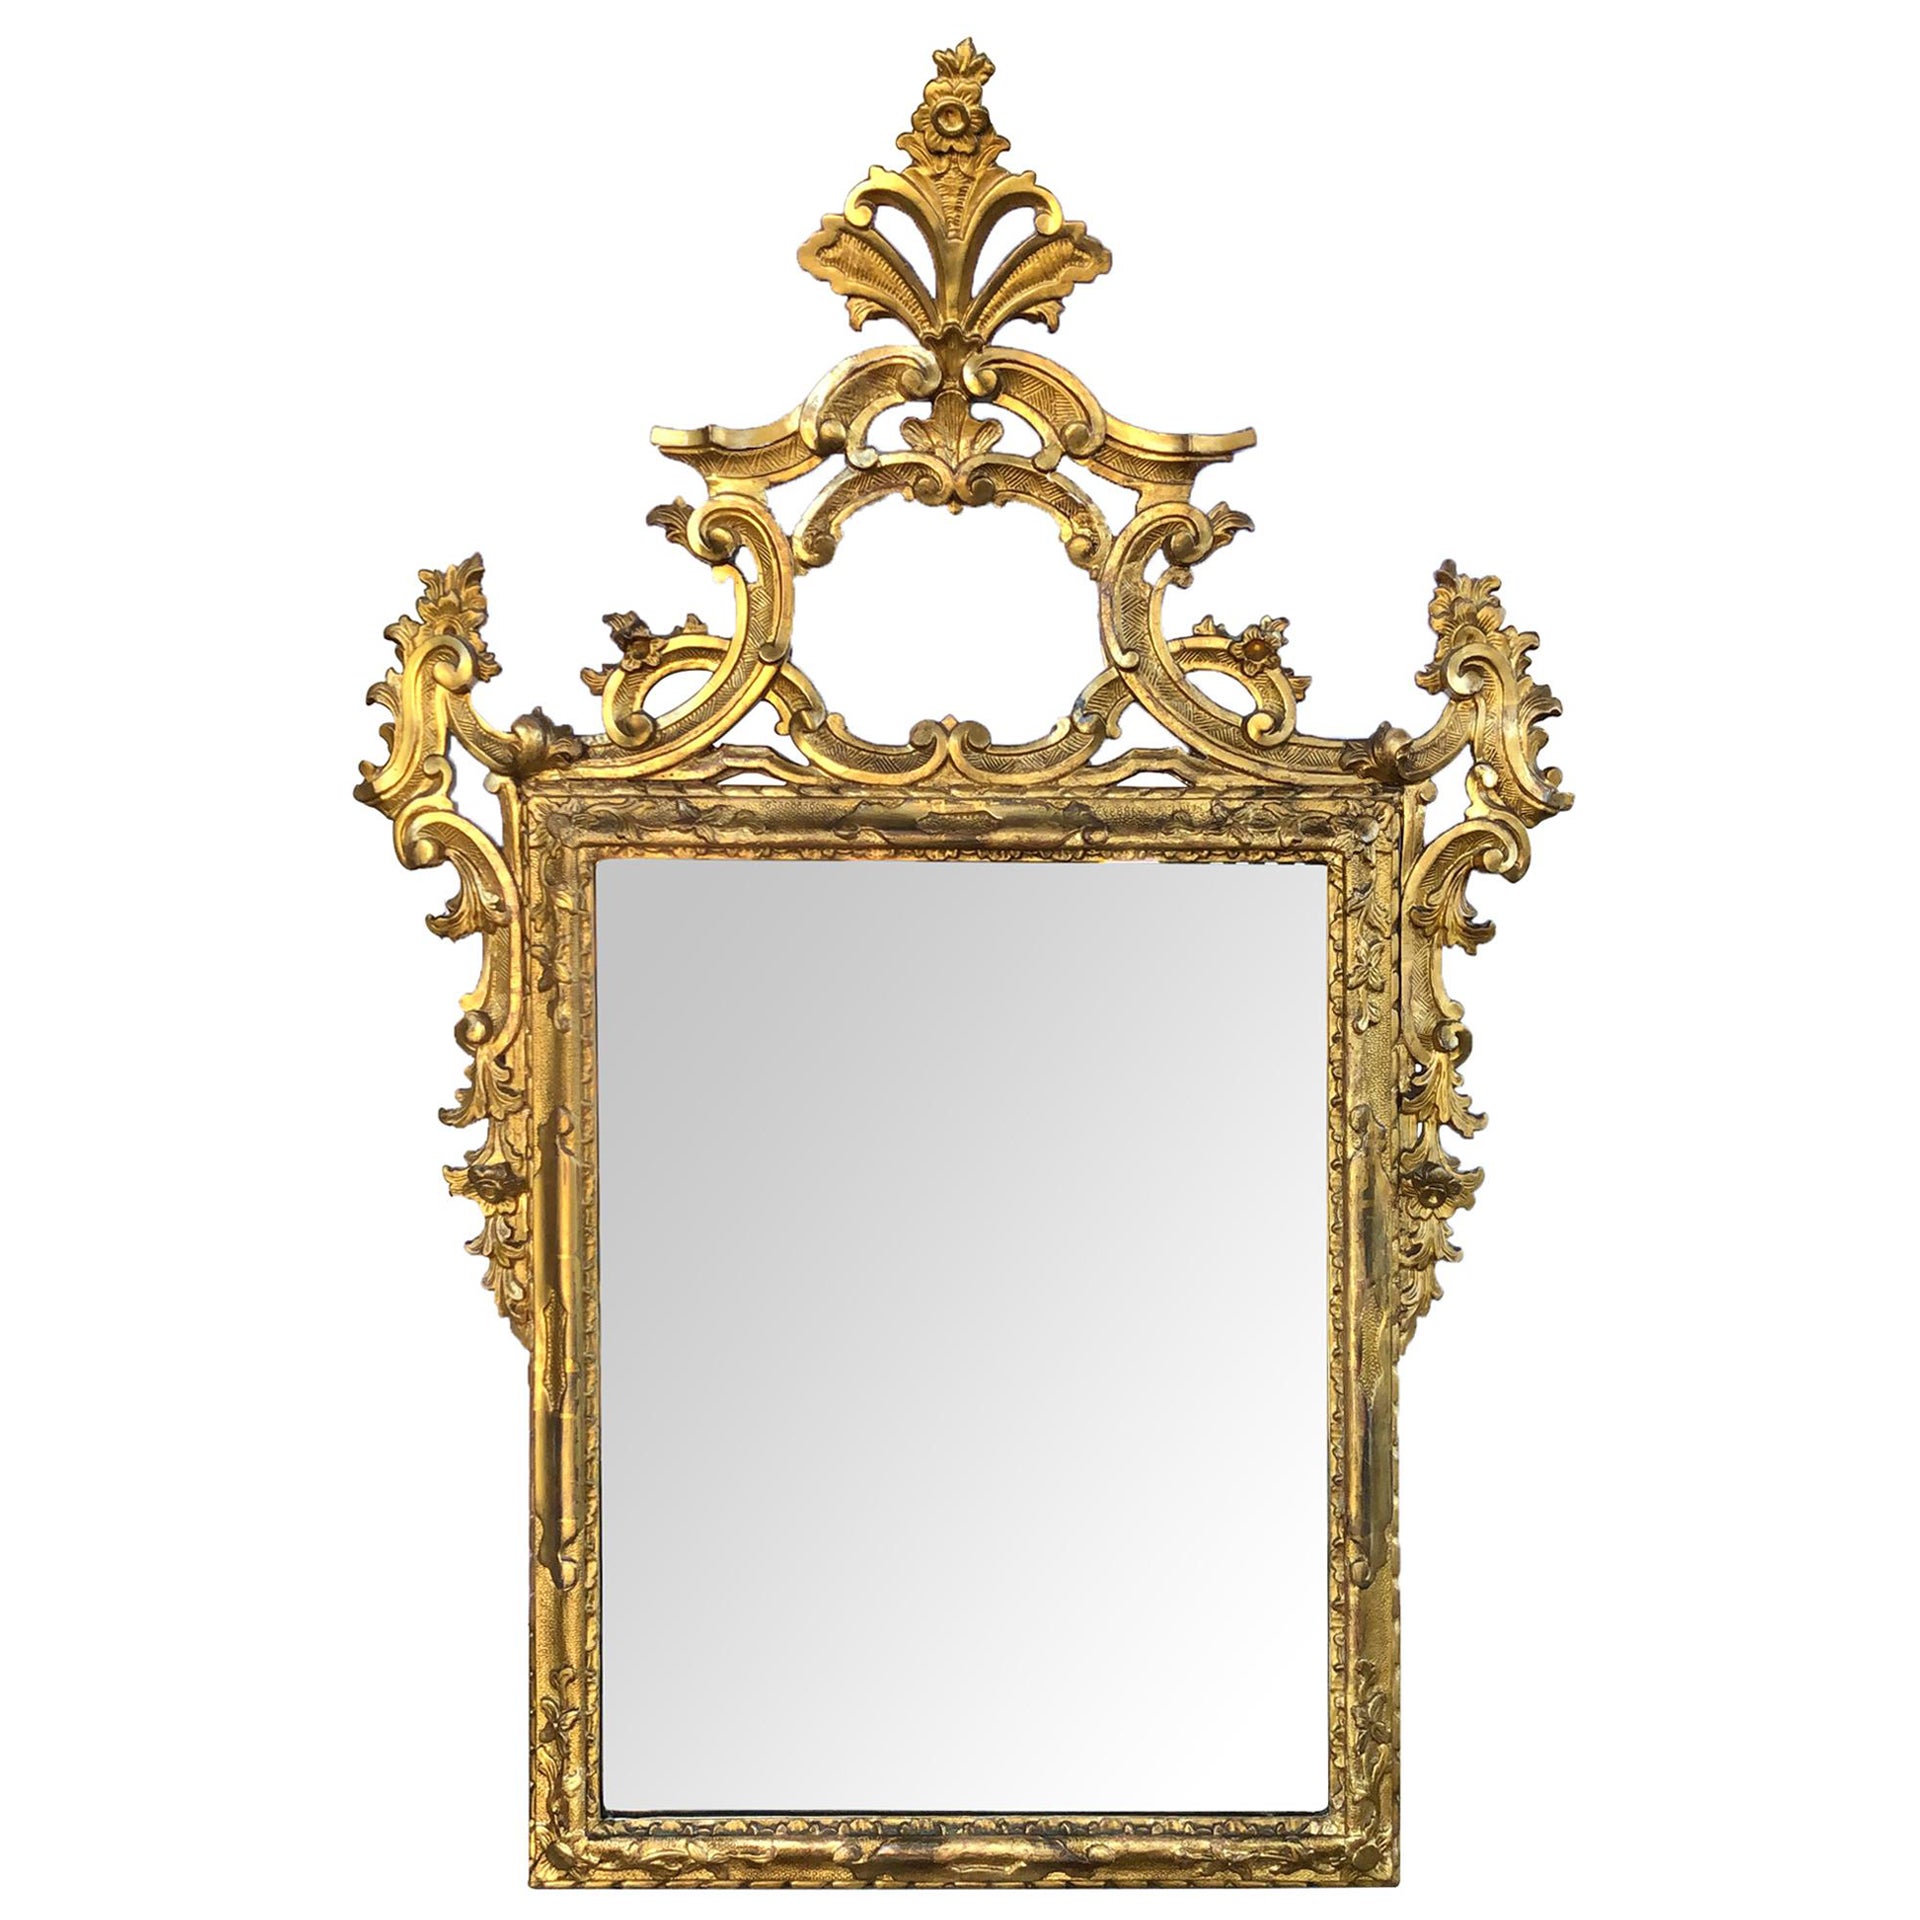 Well-carved English George II Style Giltwood Mirror with Dramatic Crest For Sale